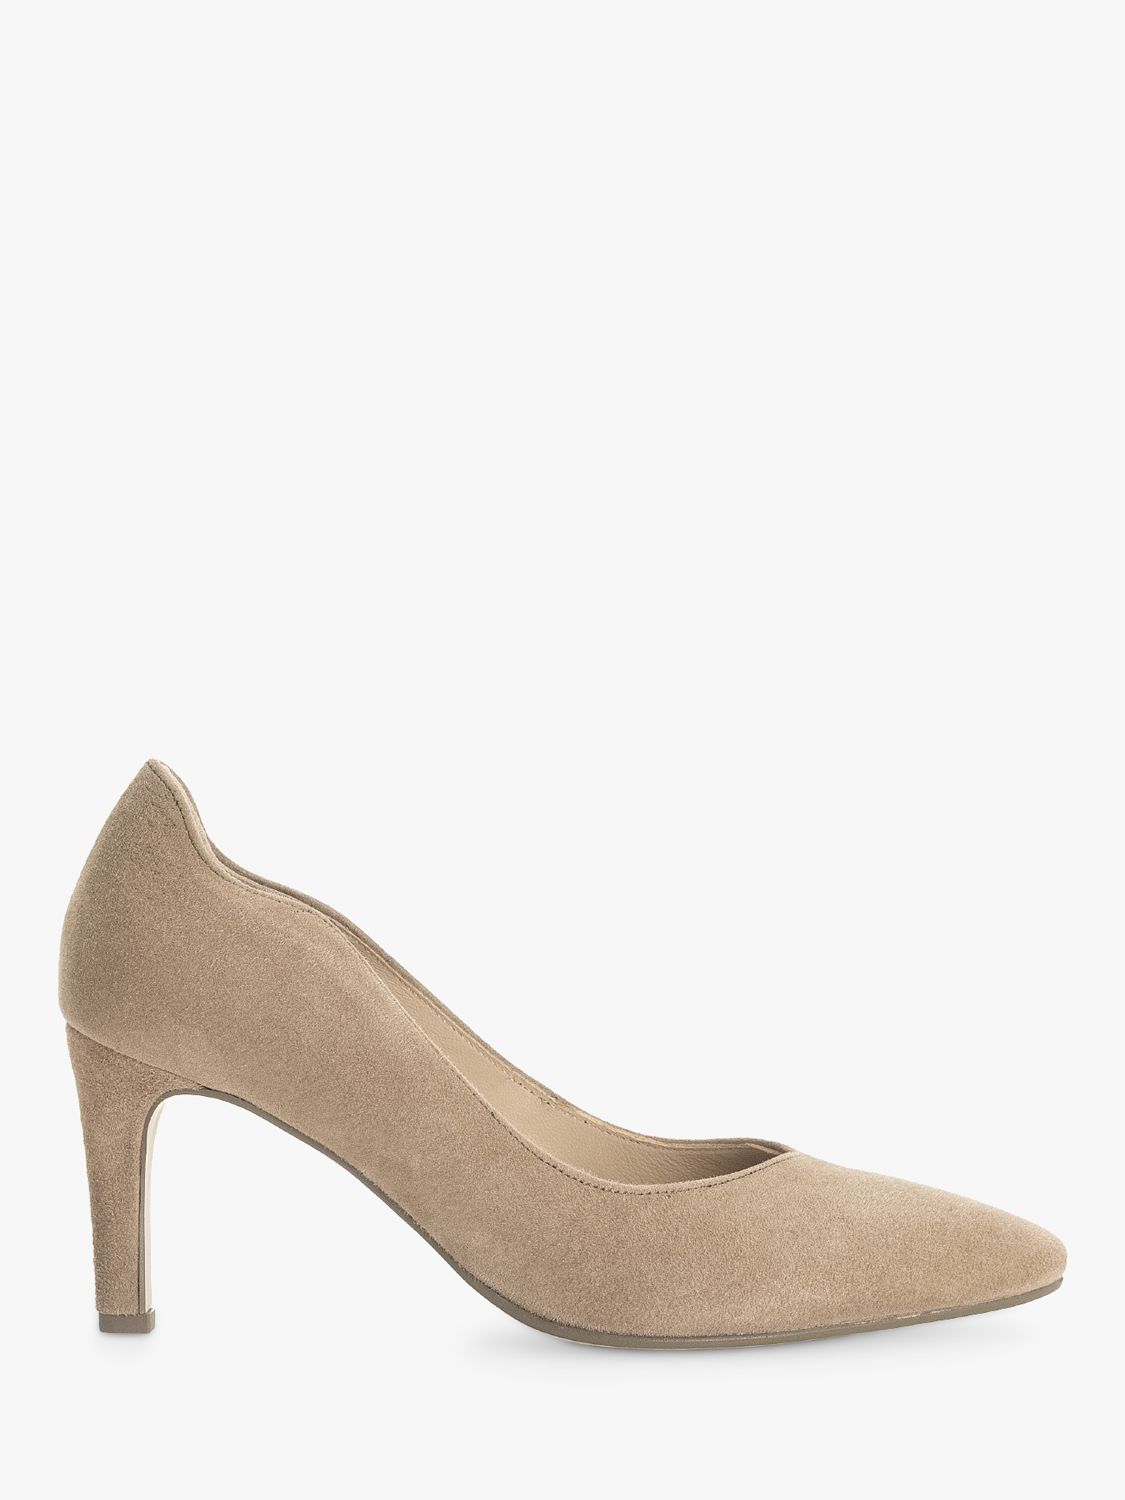 Gabor Degree Suede Court Shoes, Sand at John Lewis & Partners